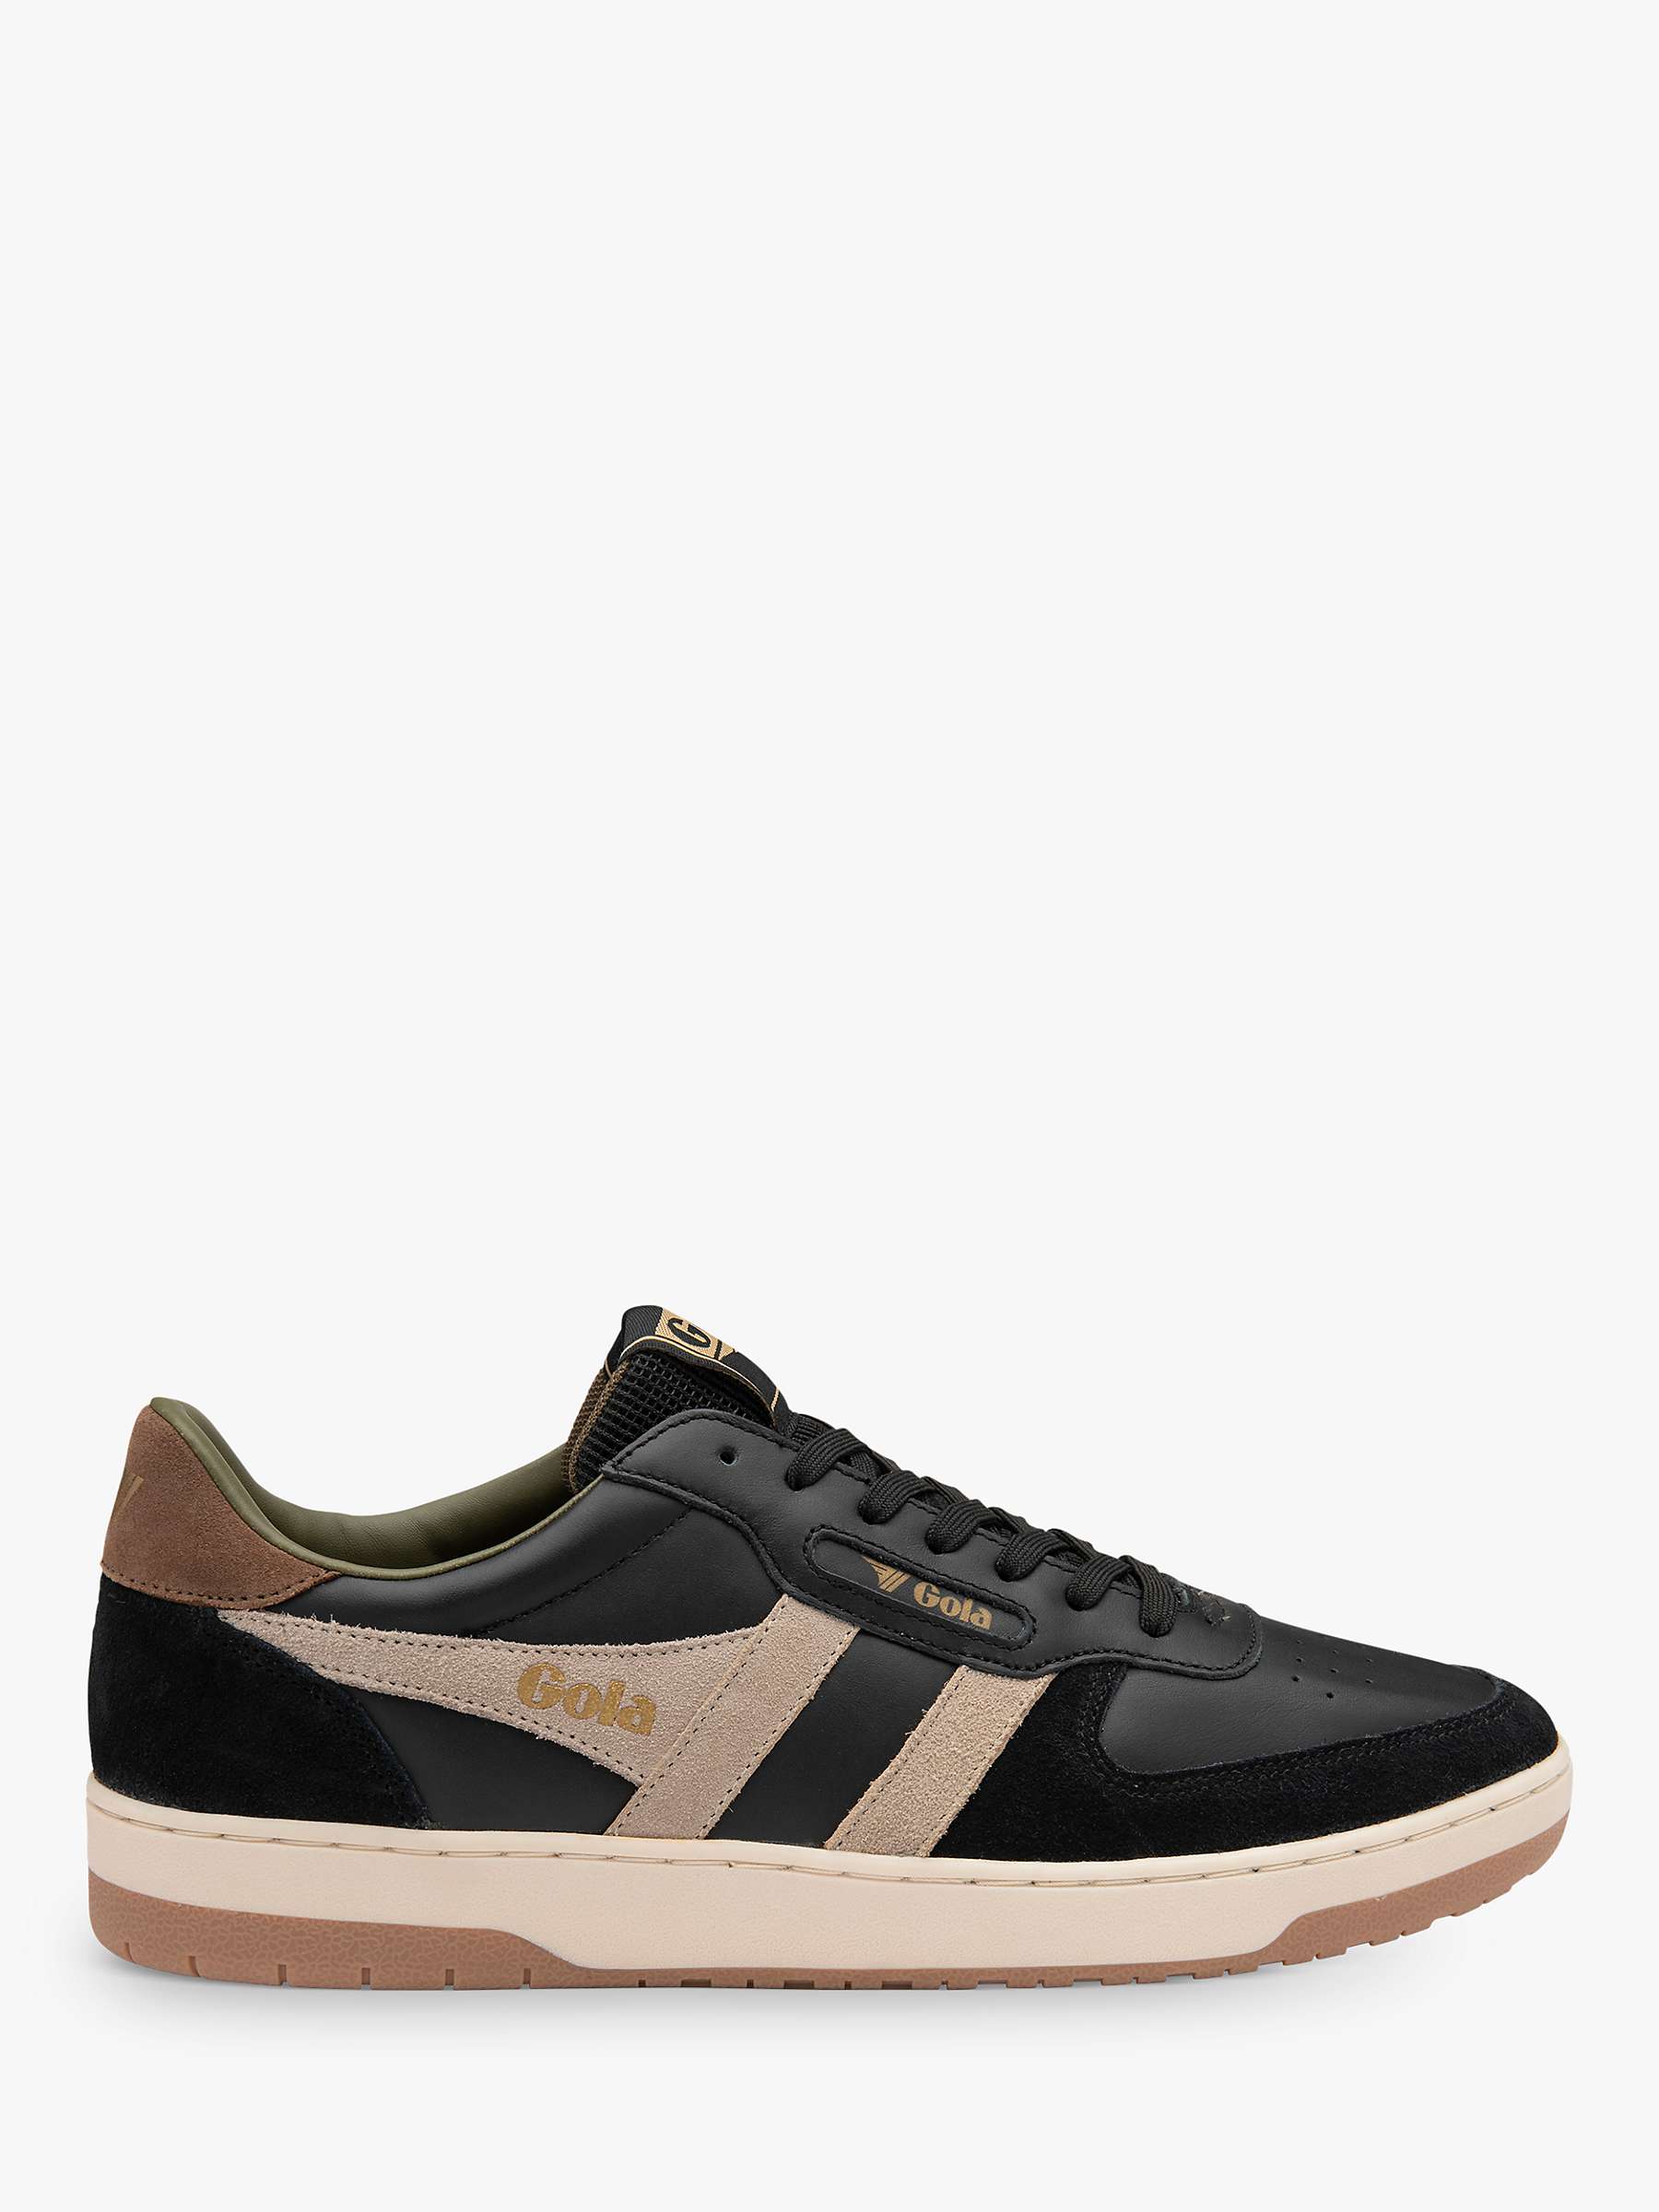 Buy Gola Classics Hawk Leather Lace Up Trainers Online at johnlewis.com